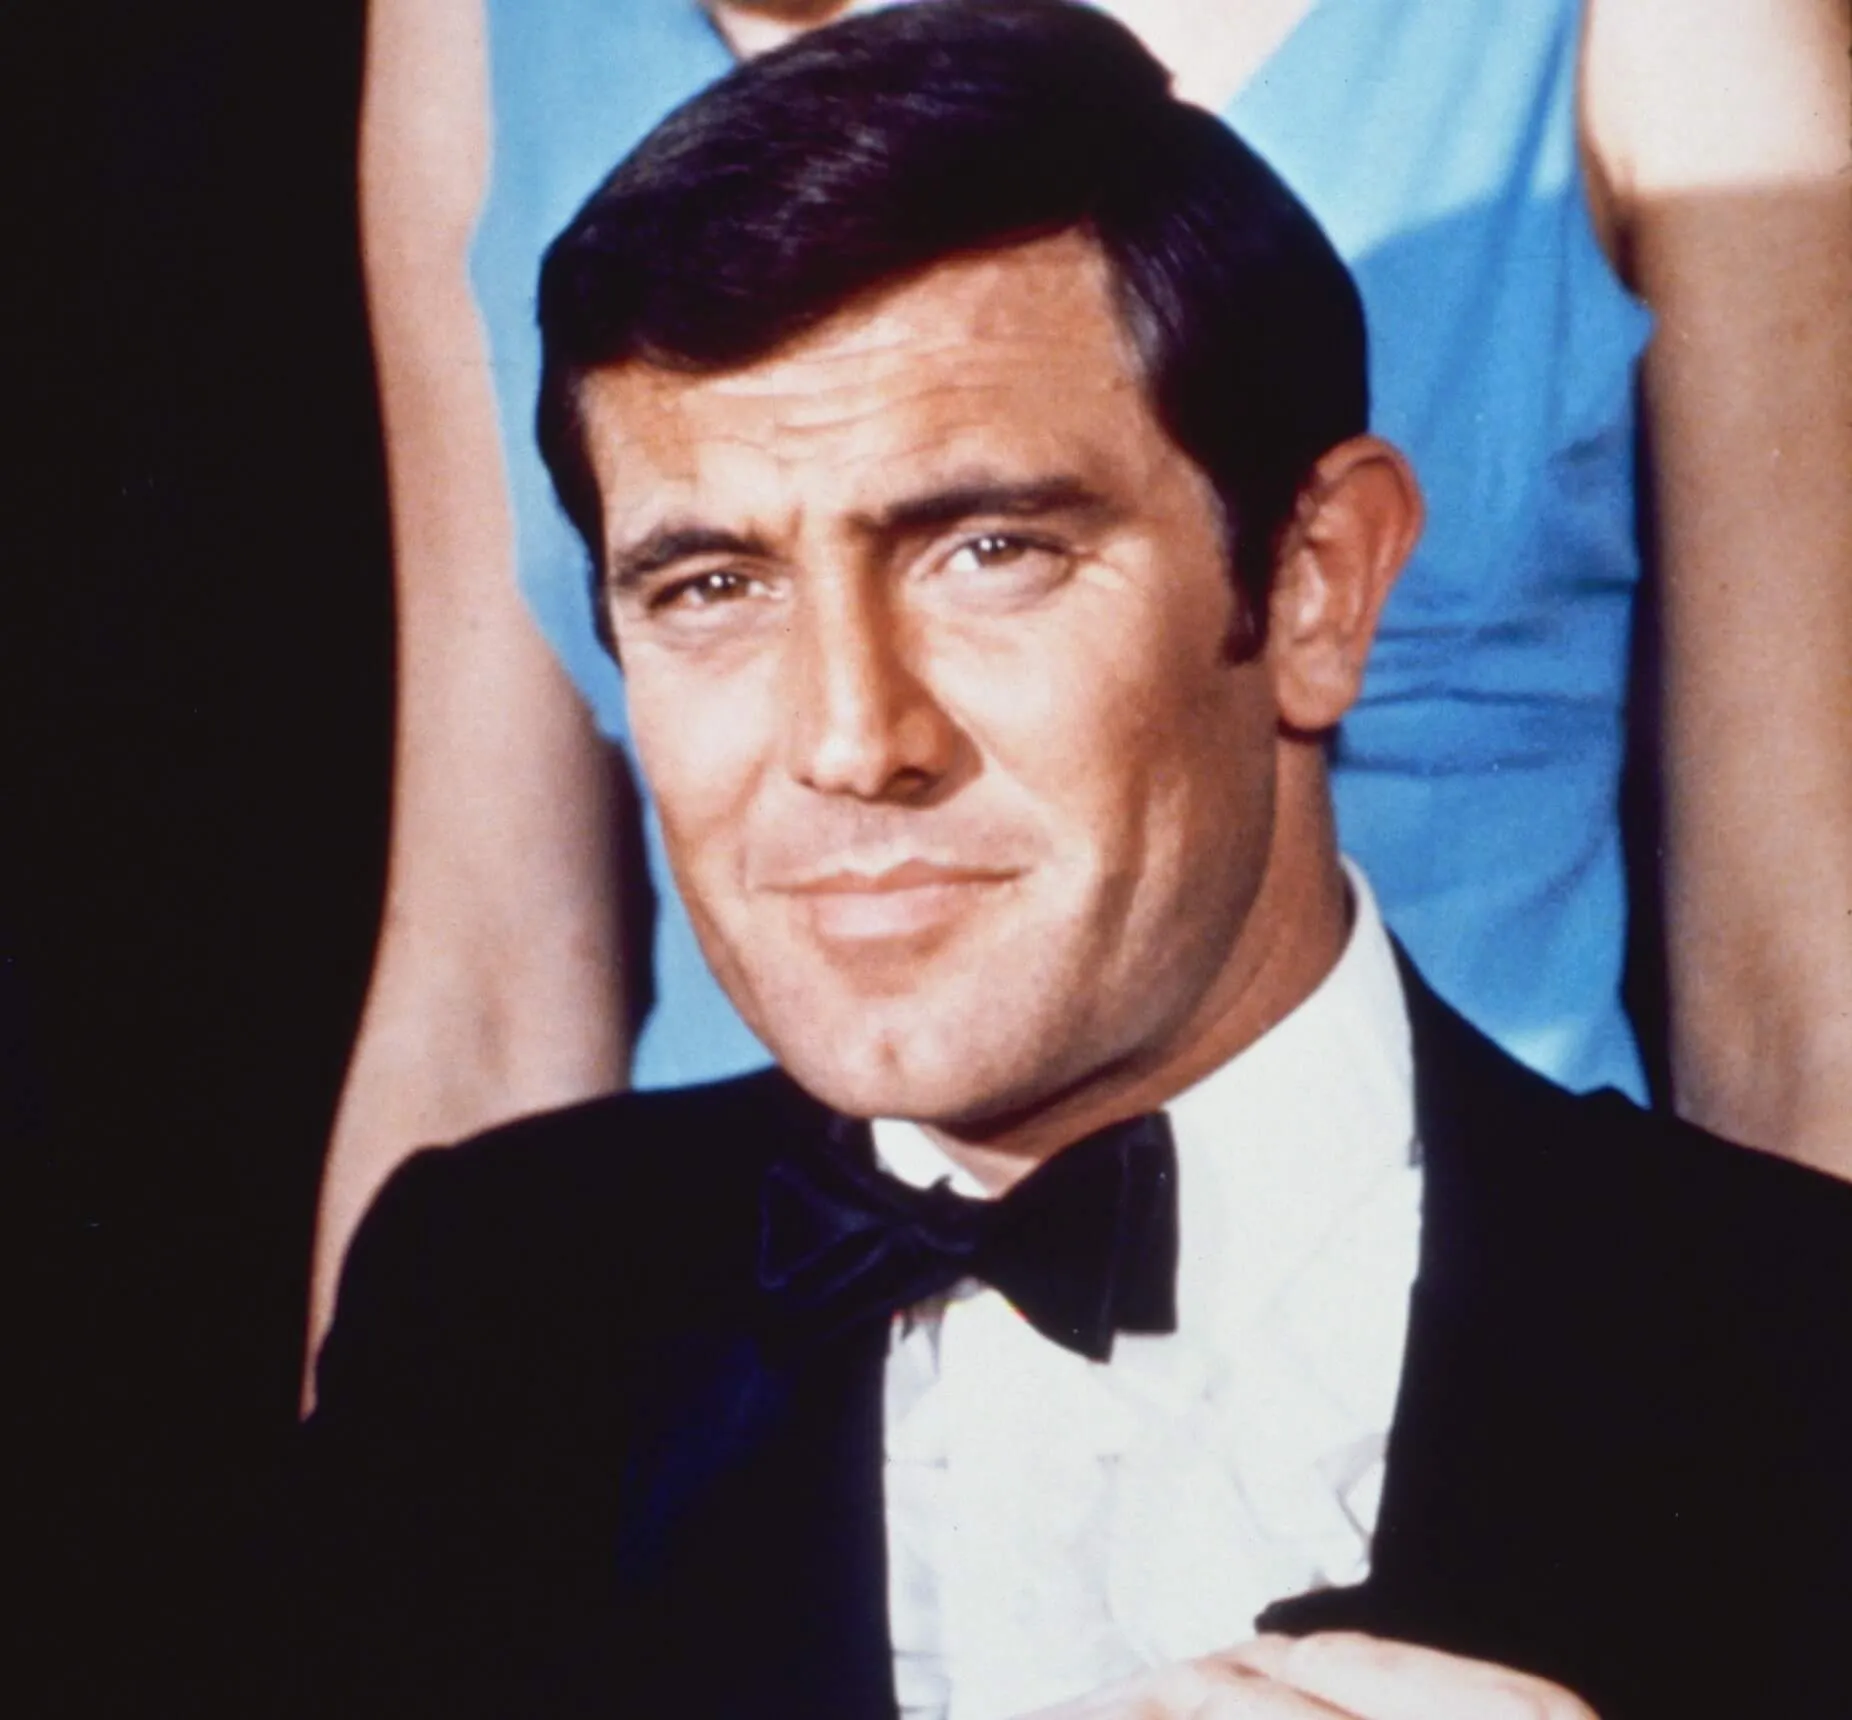 James Bond actor George Lazenby in a suit